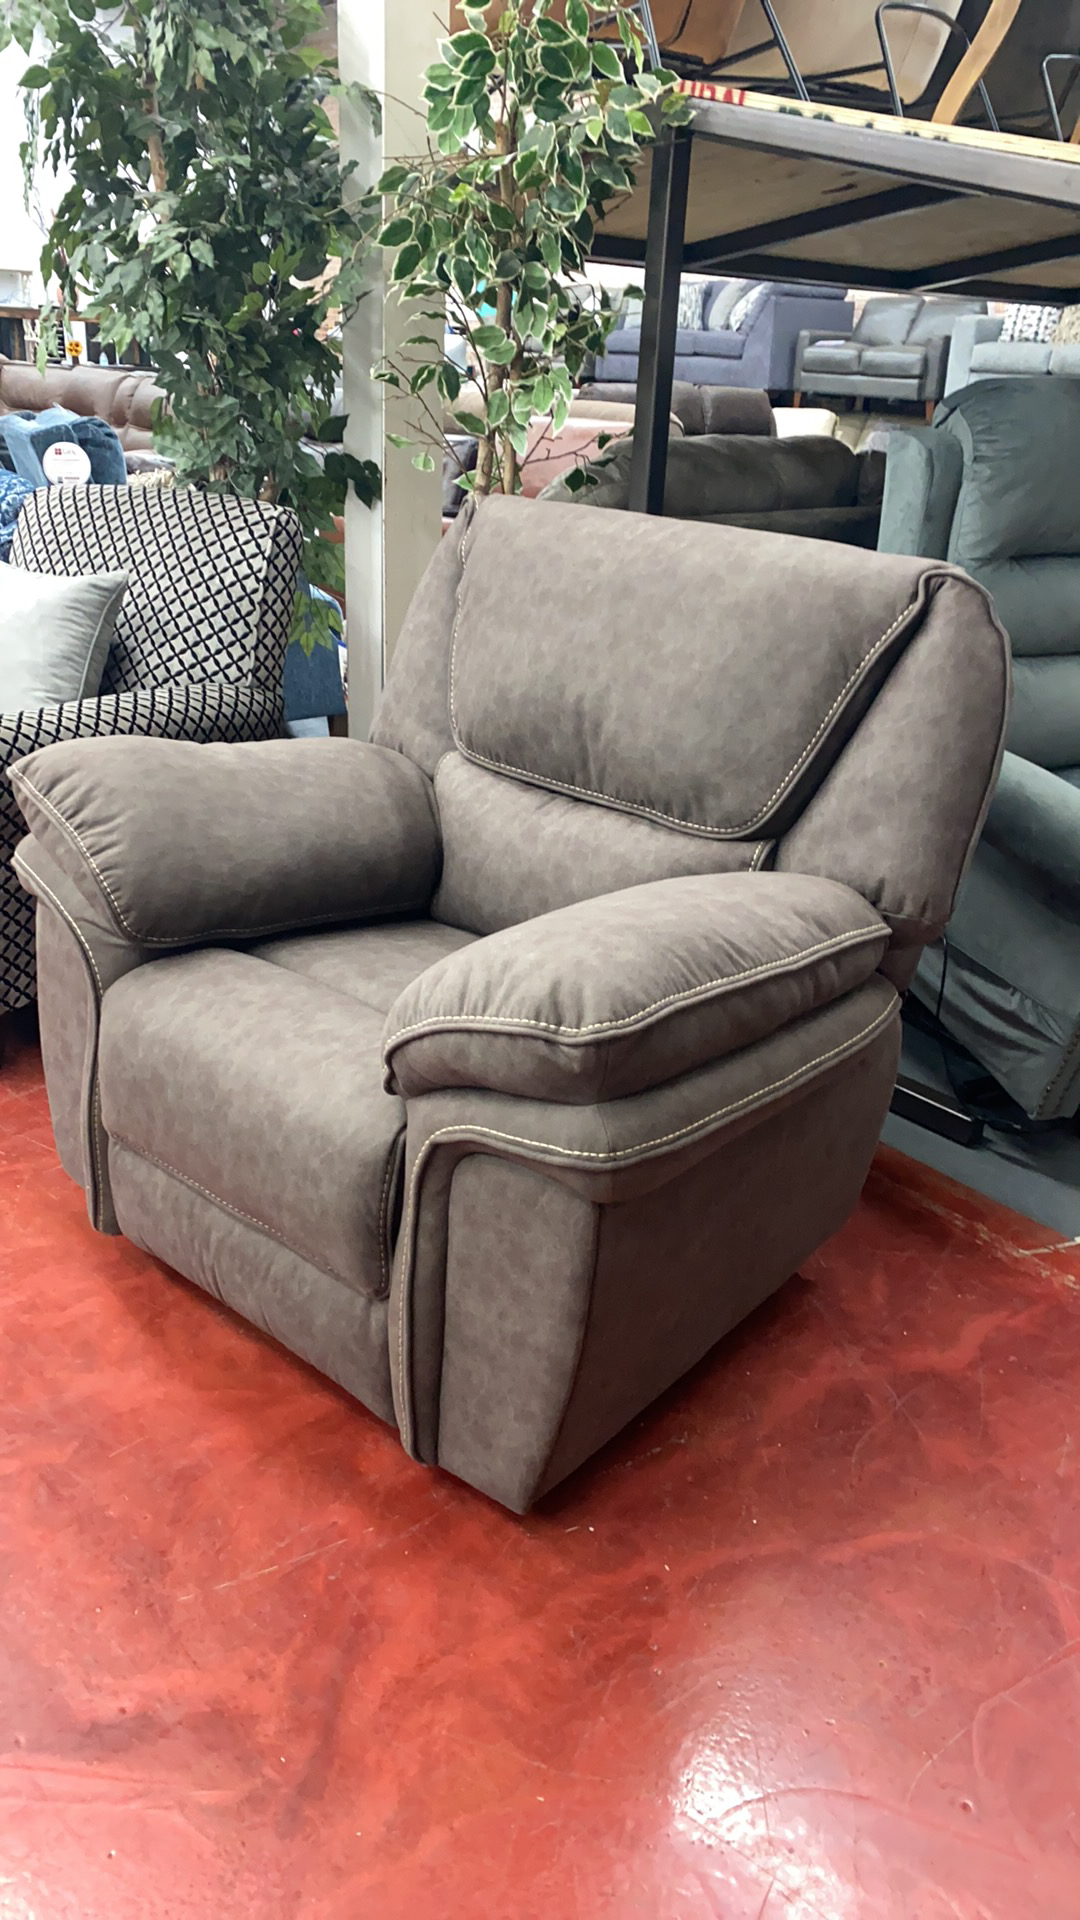 WEEKLY or MONTHLY. Arlyn Grey Swivel Glider Recliner